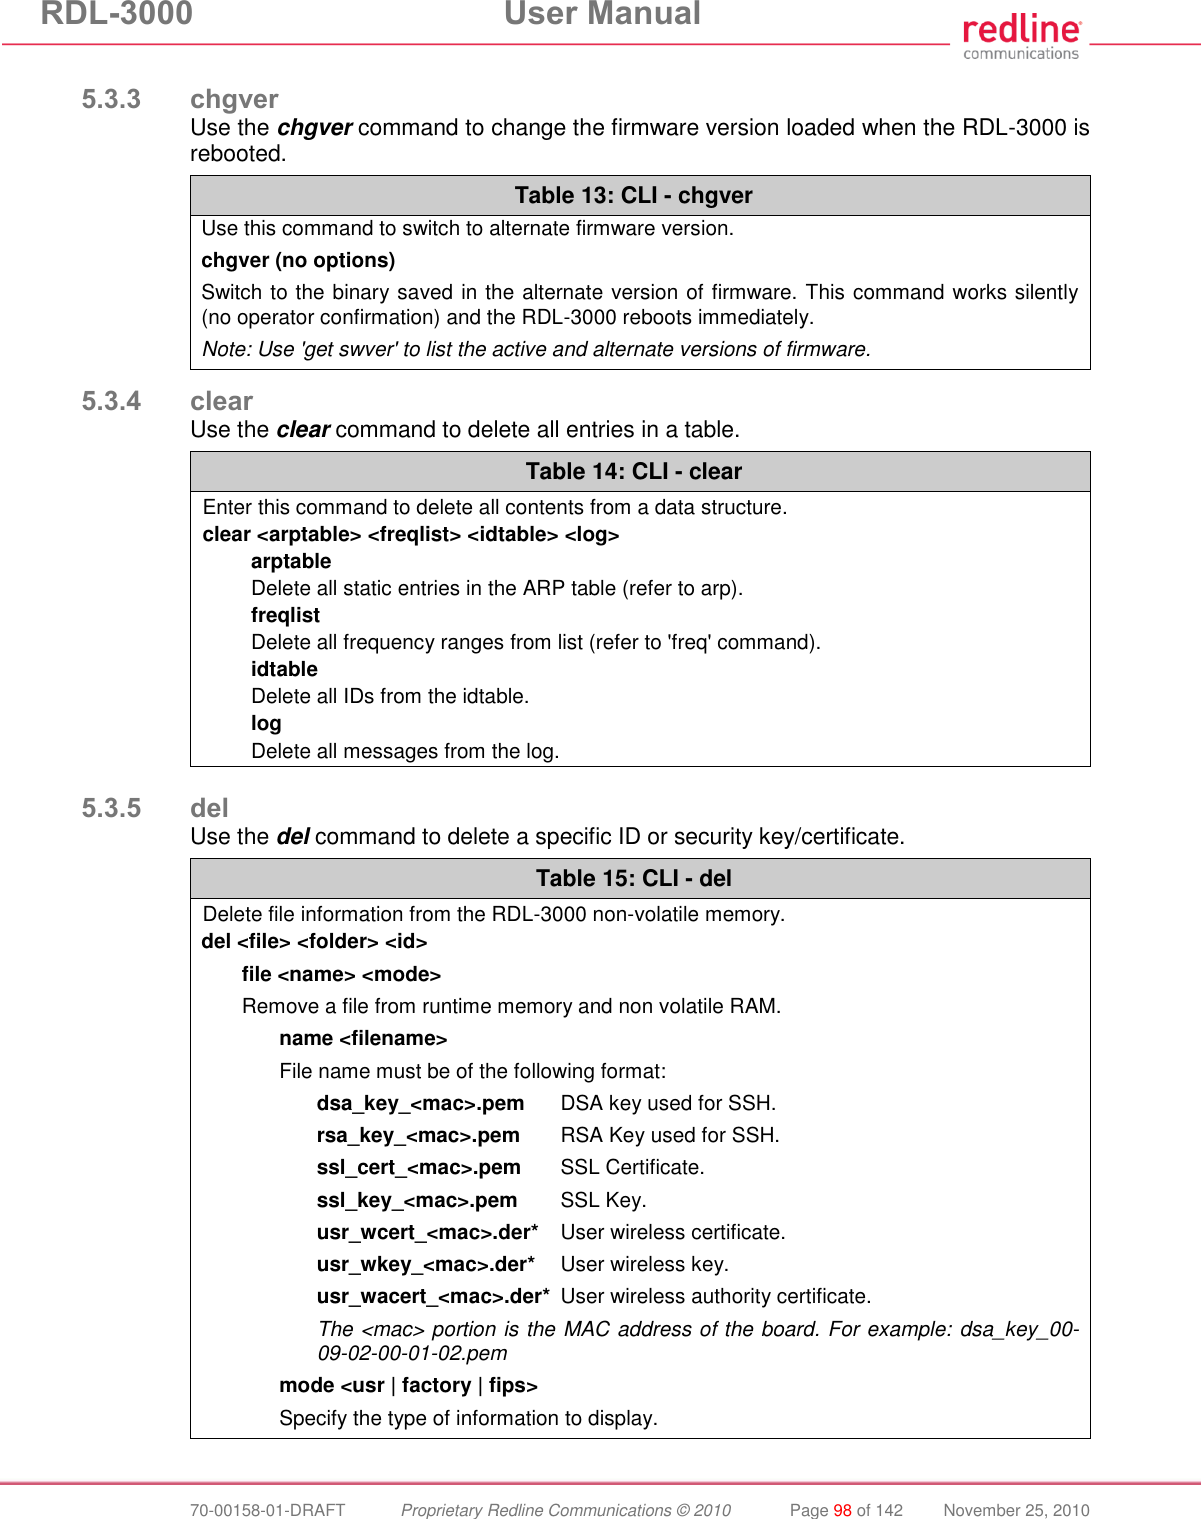 RDL-3000  User Manual  70-00158-01-DRAFT  Proprietary Redline Communications © 2010  Page 98 of 142  November 25, 2010  5.3.3 chgver Use the chgver command to change the firmware version loaded when the RDL-3000 is rebooted. Table 13: CLI - chgver Use this command to switch to alternate firmware version.  chgver (no options) Switch to the binary saved in the alternate version of firmware. This command works silently (no operator confirmation) and the RDL-3000 reboots immediately. Note: Use &apos;get swver&apos; to list the active and alternate versions of firmware.  5.3.4 clear Use the clear command to delete all entries in a table. Table 14: CLI - clear Enter this command to delete all contents from a data structure. clear &lt;arptable&gt; &lt;freqlist&gt; &lt;idtable&gt; &lt;log&gt; arptable Delete all static entries in the ARP table (refer to arp). freqlist Delete all frequency ranges from list (refer to &apos;freq&apos; command). idtable Delete all IDs from the idtable. log Delete all messages from the log.   5.3.5 del Use the del command to delete a specific ID or security key/certificate. Table 15: CLI - del Delete file information from the RDL-3000 non-volatile memory. del &lt;file&gt; &lt;folder&gt; &lt;id&gt; file &lt;name&gt; &lt;mode&gt; Remove a file from runtime memory and non volatile RAM.   name &lt;filename&gt;   File name must be of the following format:  dsa_key_&lt;mac&gt;.pem  DSA key used for SSH.  rsa_key_&lt;mac&gt;.pem  RSA Key used for SSH.  ssl_cert_&lt;mac&gt;.pem  SSL Certificate.  ssl_key_&lt;mac&gt;.pem  SSL Key.  usr_wcert_&lt;mac&gt;.der*  User wireless certificate.  usr_wkey_&lt;mac&gt;.der*  User wireless key.  usr_wacert_&lt;mac&gt;.der*  User wireless authority certificate.  The &lt;mac&gt; portion is the MAC address of the board. For example: dsa_key_00-09-02-00-01-02.pem mode &lt;usr | factory | fips&gt; Specify the type of information to display. 